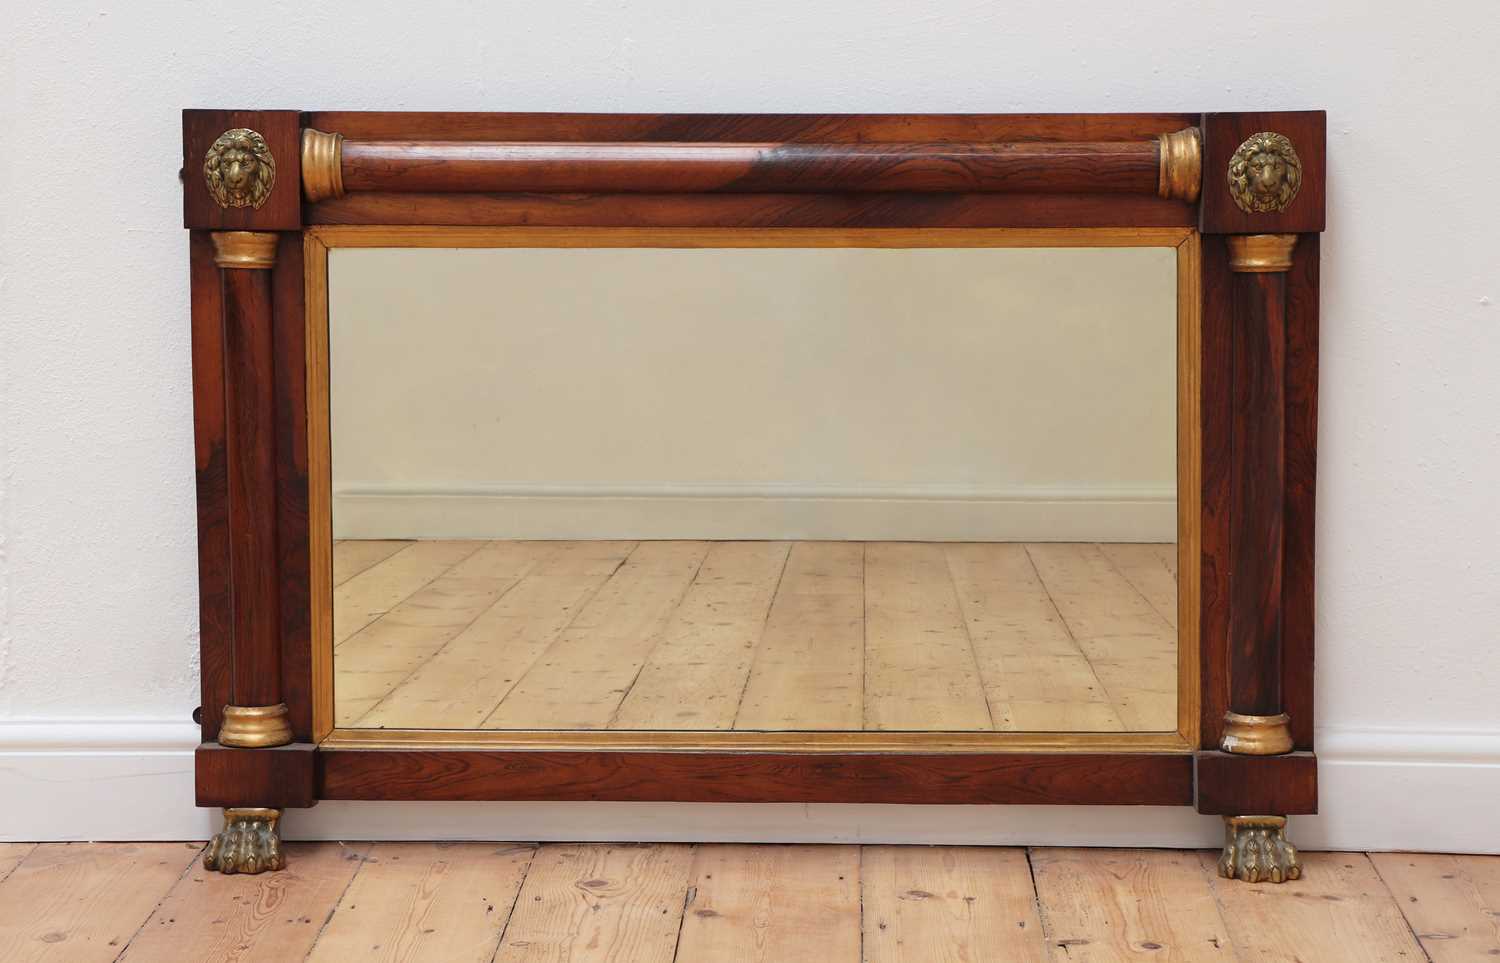 Lot 487 - A Regency rosewood and parcel-gilt overmantel mirror